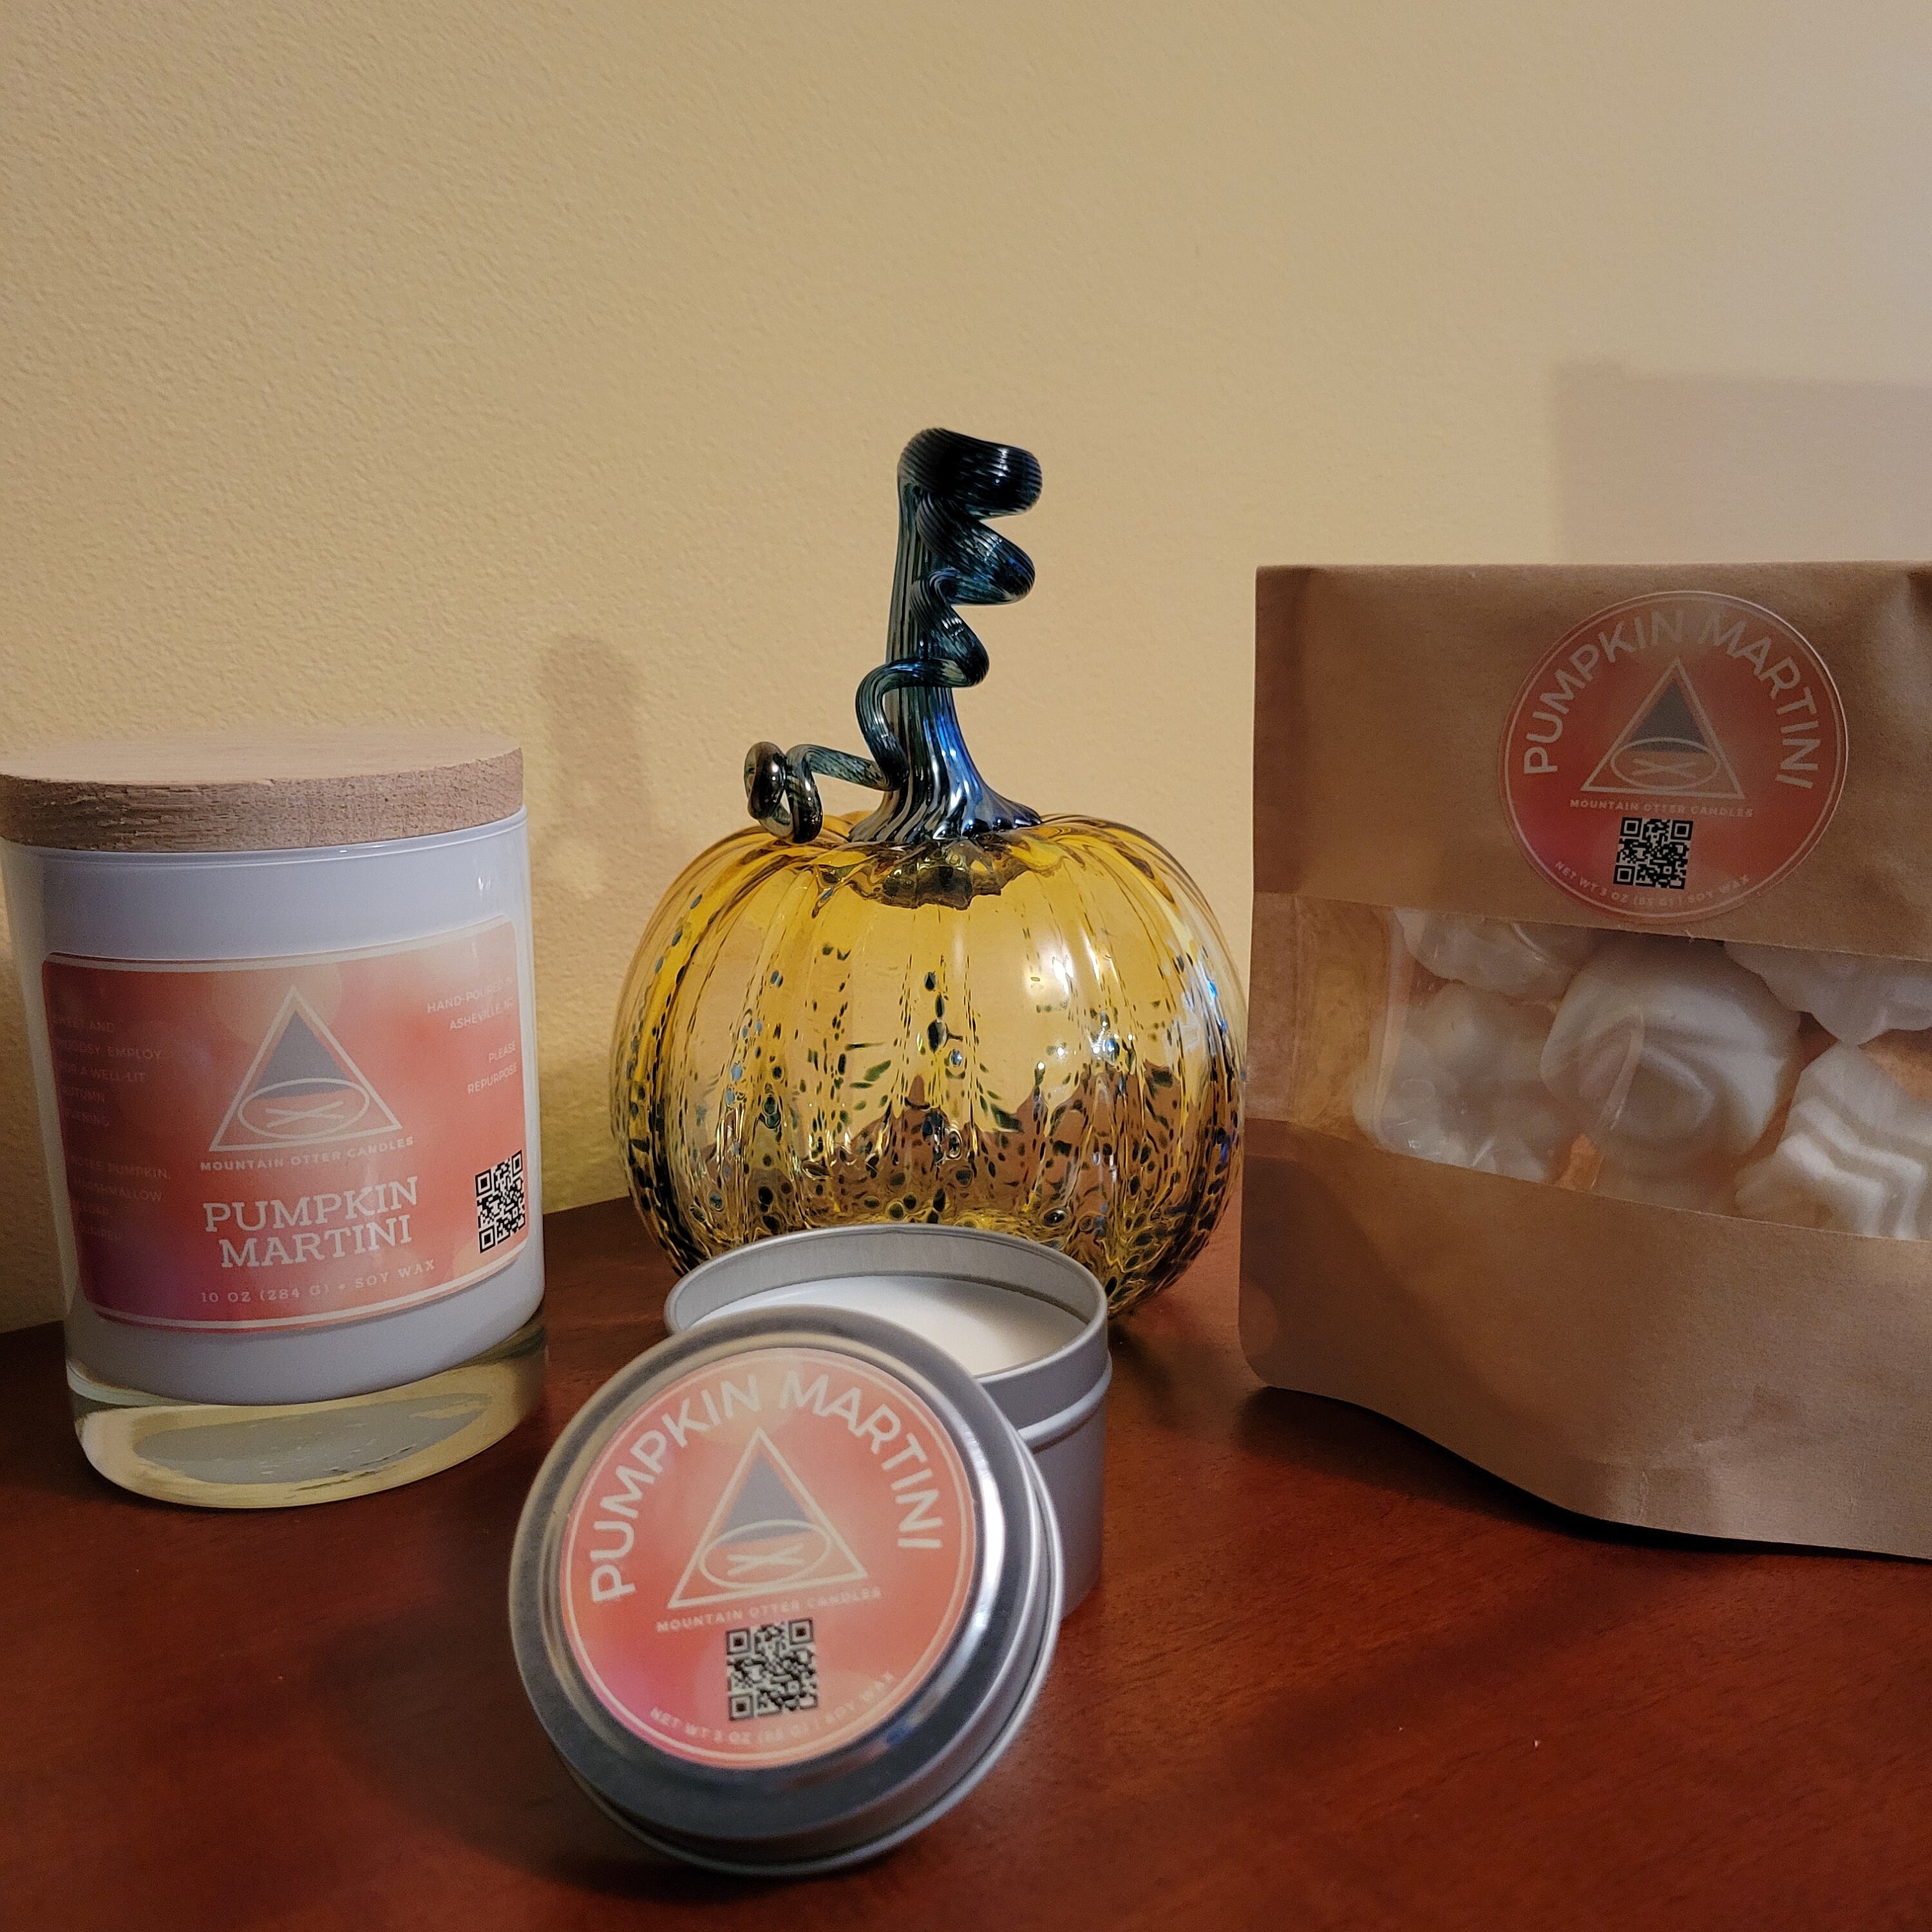 Pumpkin Marshmallow Canning Jar Soy Candle – Scents of Soy Candle Co.